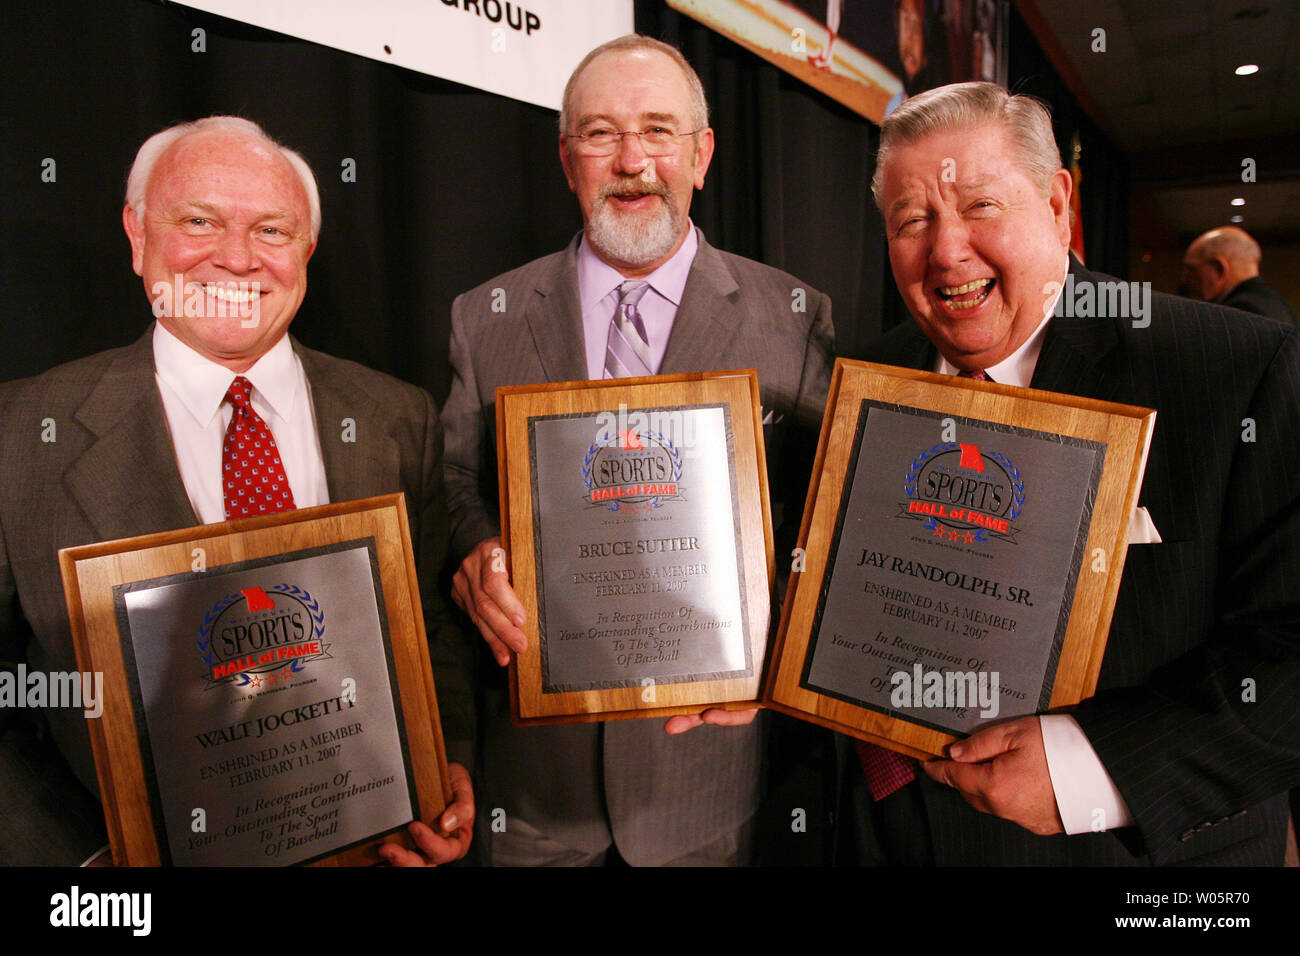 Several new members of the Missouri Sports Hall of Fame (L to R) St. Louis Cardinals General Manager Walt Jocketty, former St. Louis Cardinals pitcher and member of the National Baseball Hall of Fame Bruce Sutter and broadcaster Jay Randolph, Sr. show off their placques following the Enshrinement Banquet and ceremonies in Springfield, Missouri on February 11, 2007. A total of 15 new members with sports related backrounds will enter as the class of 2007. (UPI Photo/Bill Greenblatt) Stock Photo